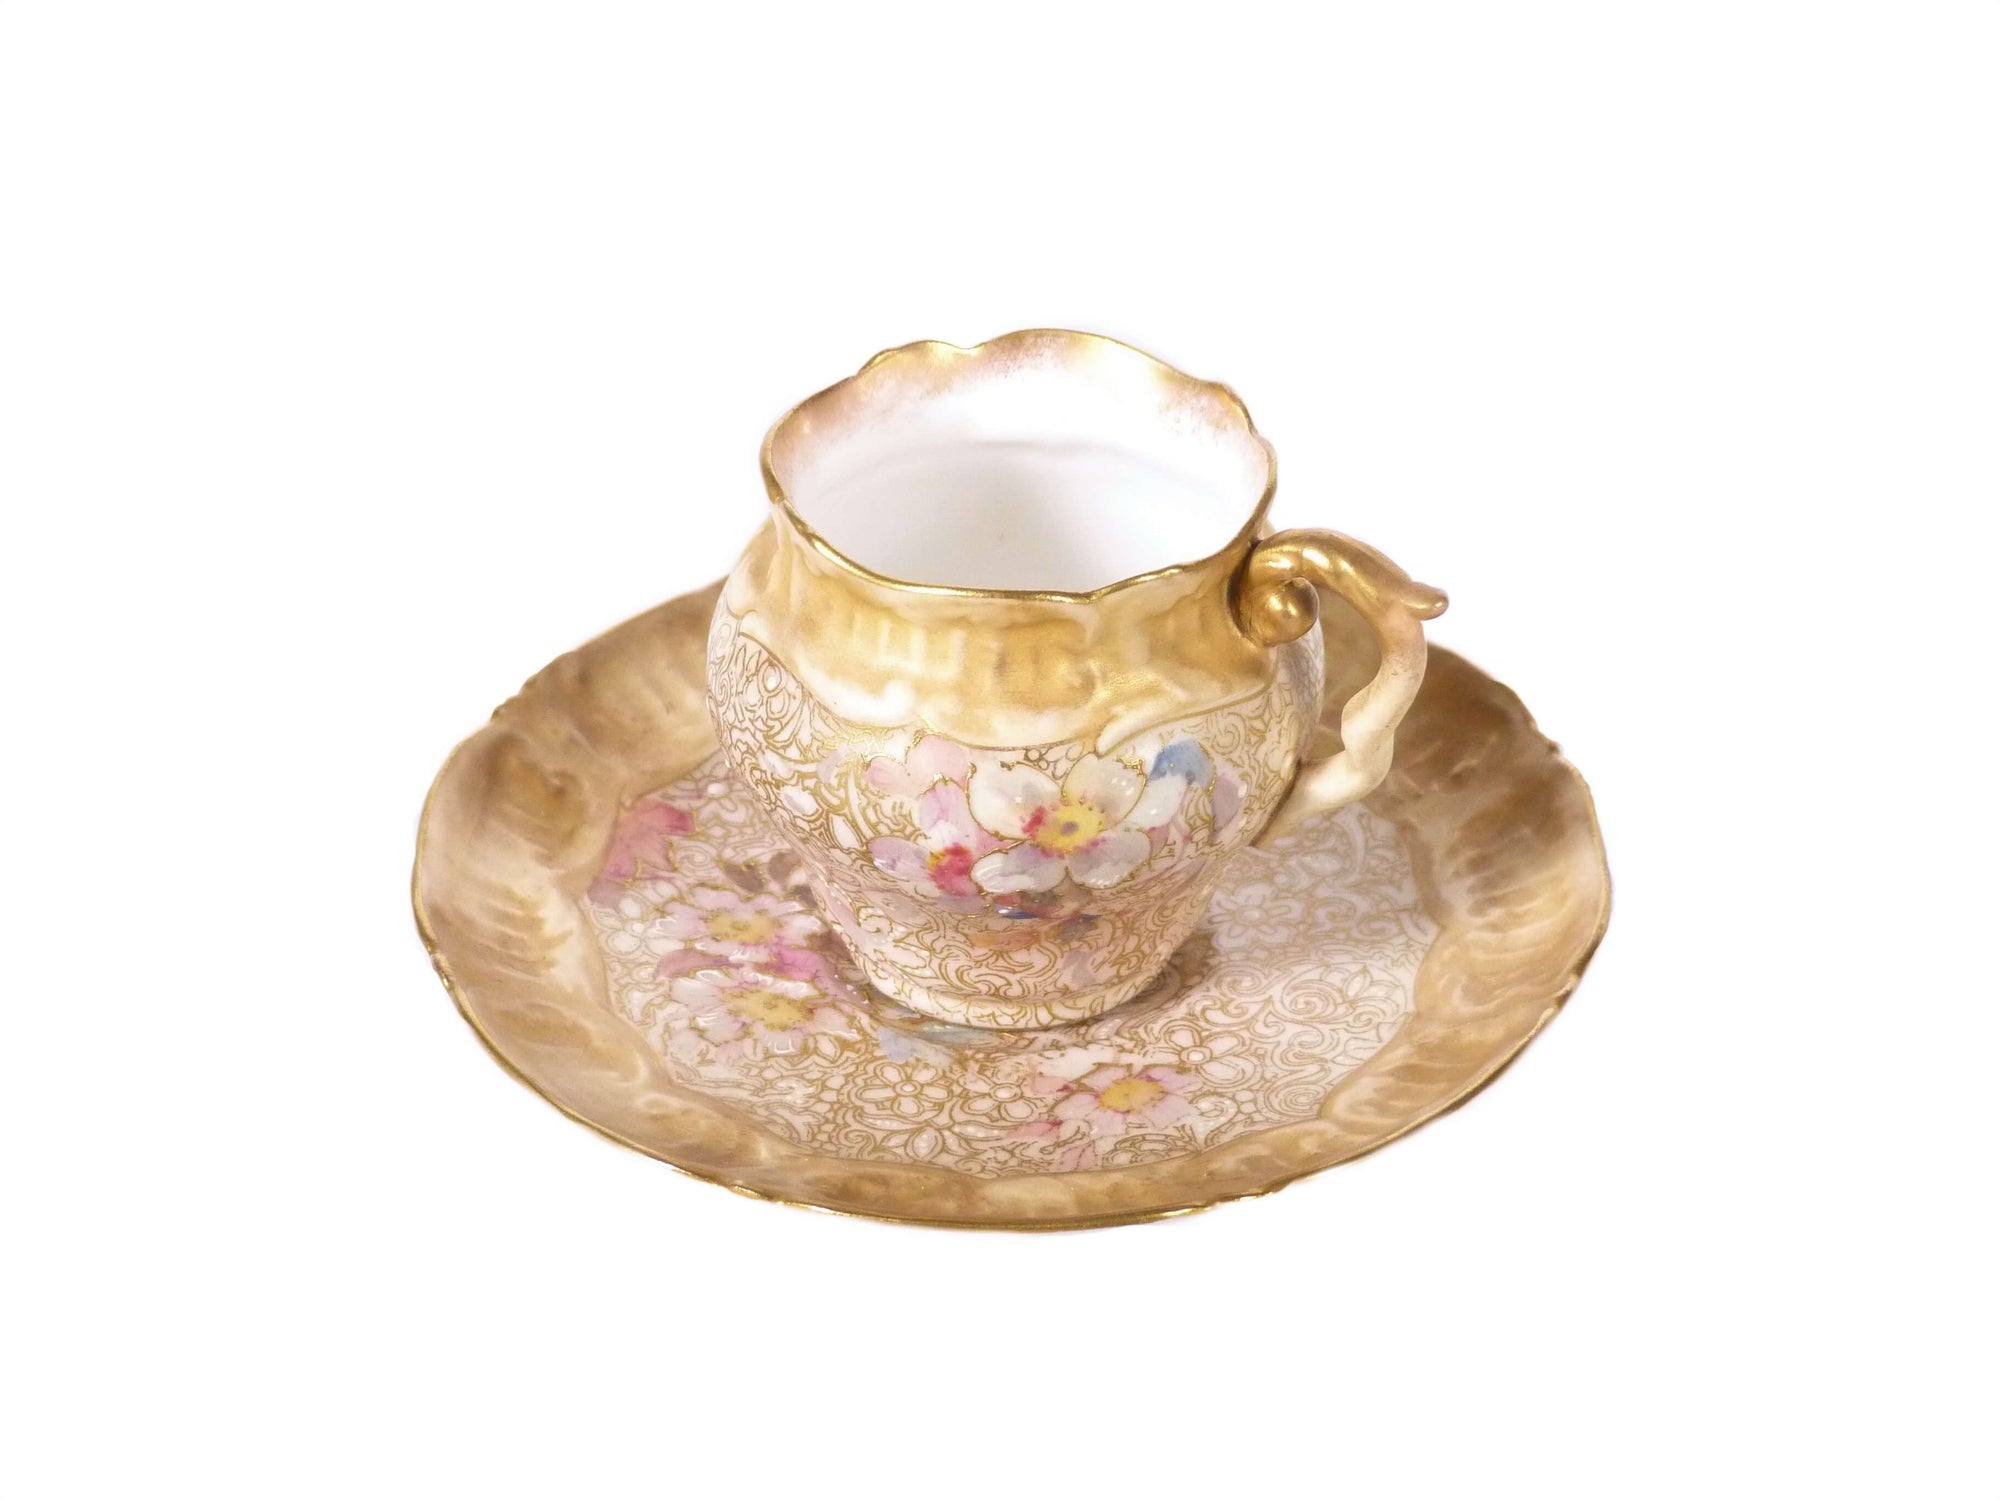 Antique Doulton Demitasse Cup and Saucer, 1891-1901, Hand Painted Chintz